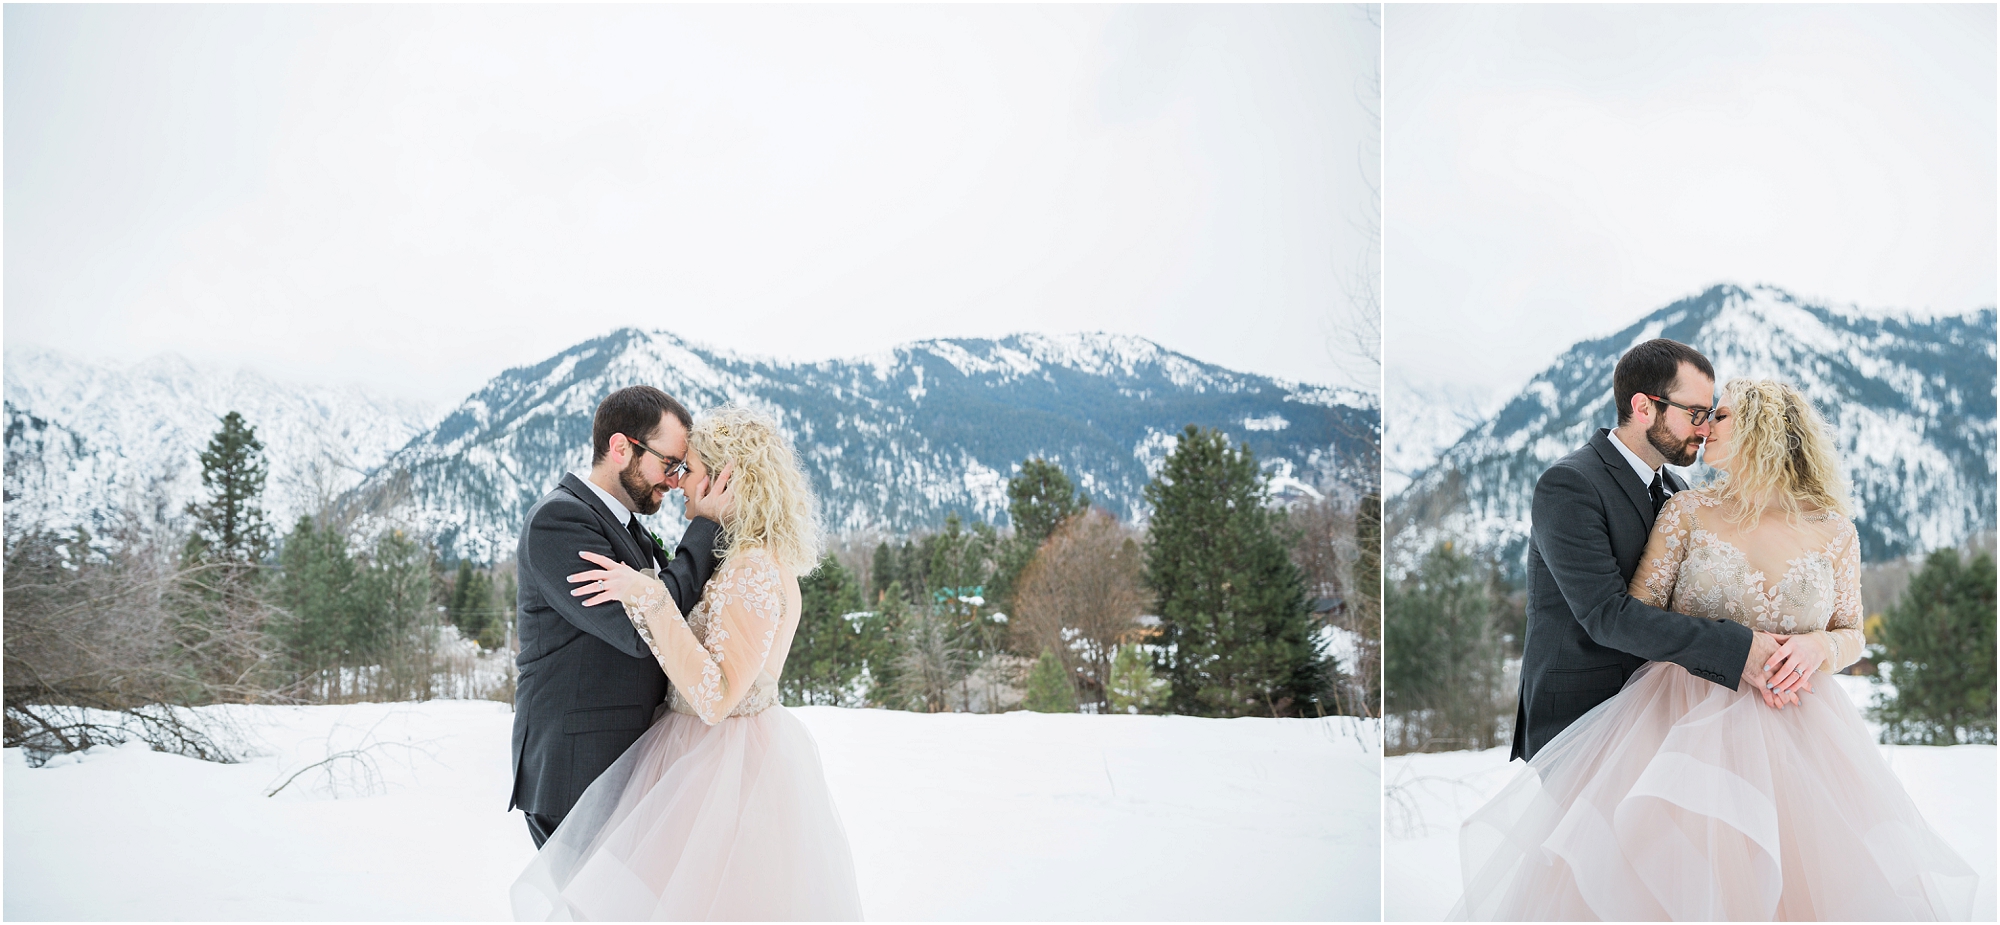 A bride wears a blush gown at this winter styled shoot by Bend OR wedding photographer Erica Swantek.